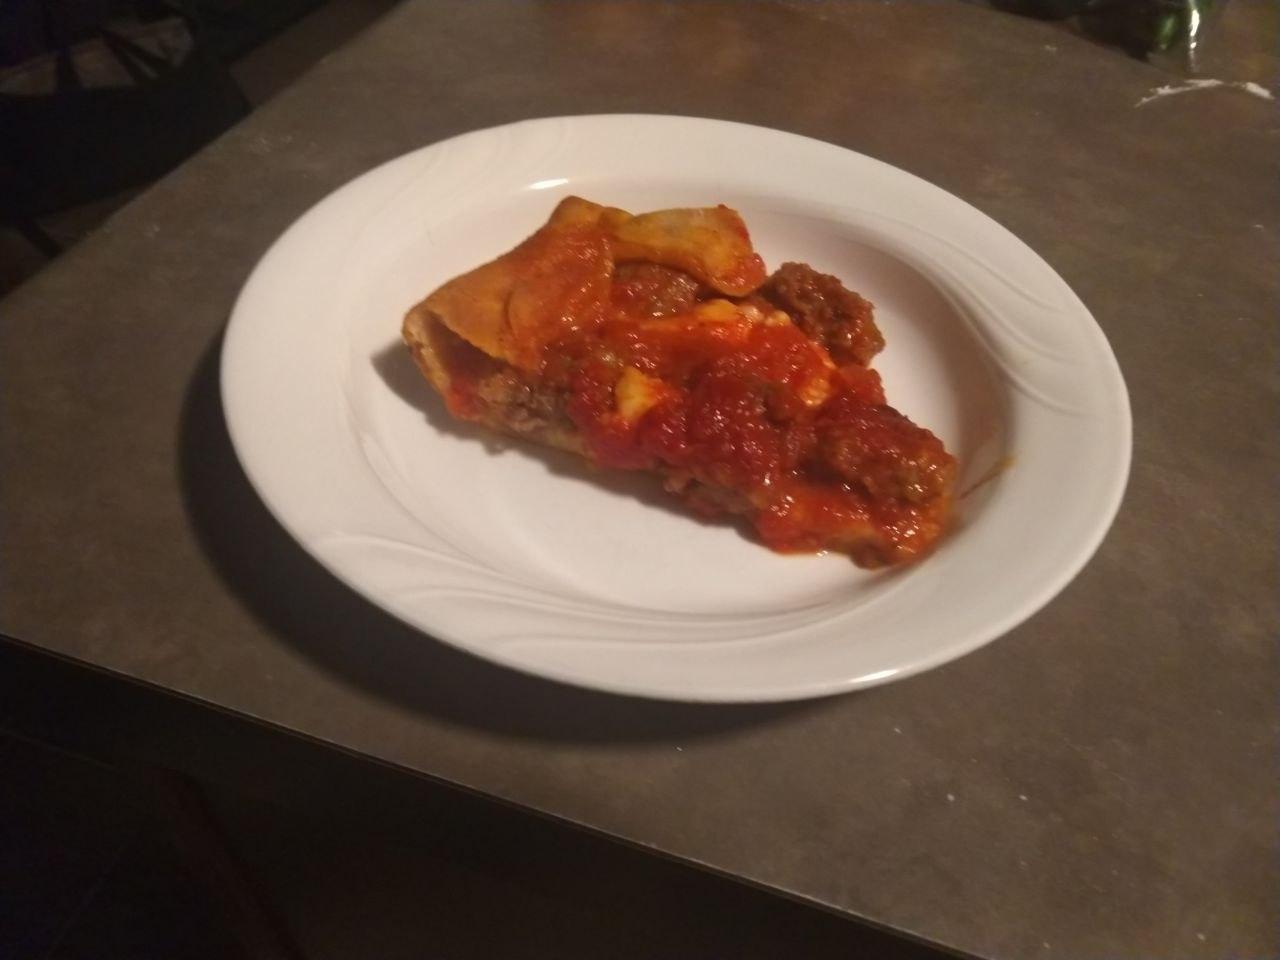 A slice of deep dish pizza.